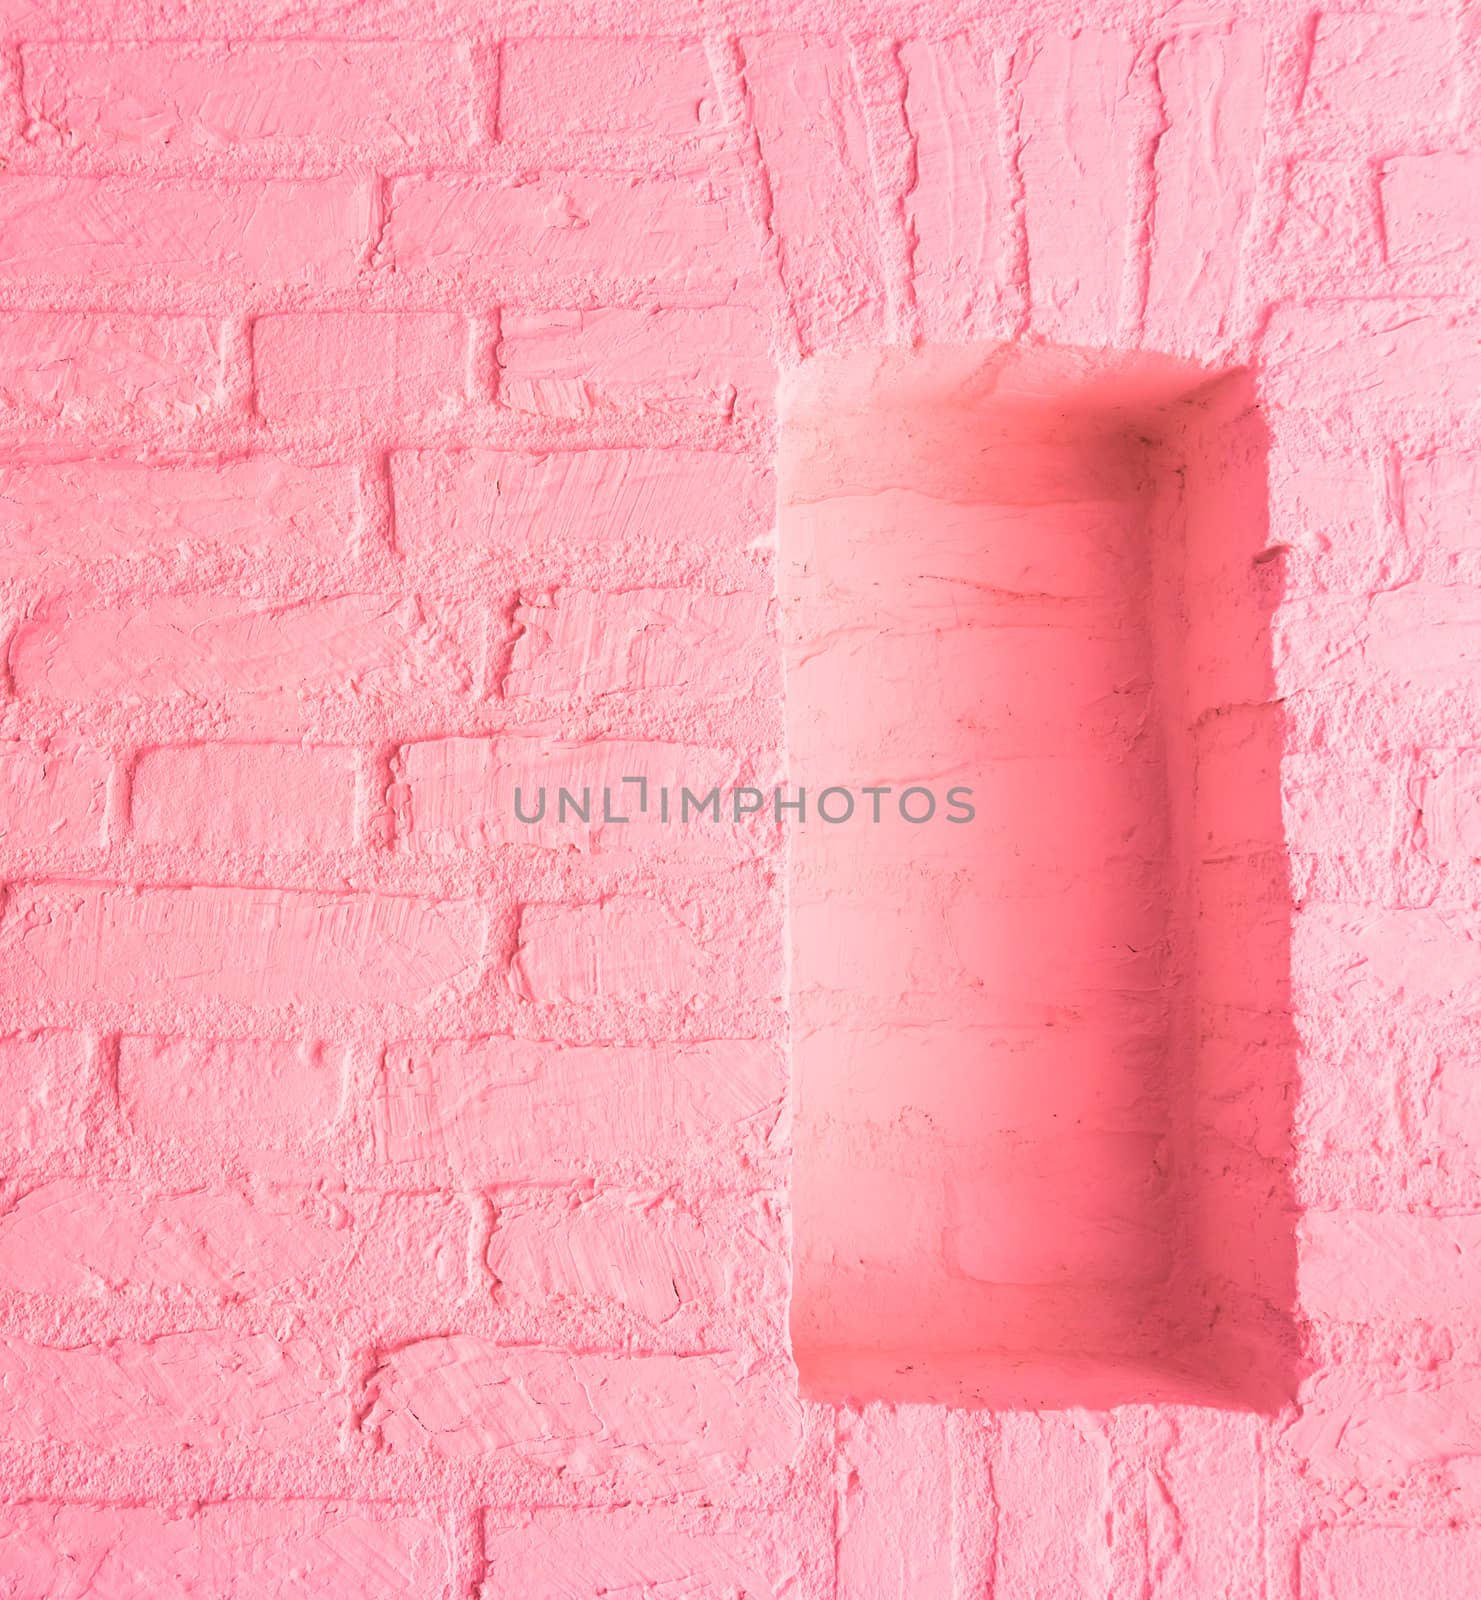 Modern vintage soft light pink stone brick wall background with empty window space